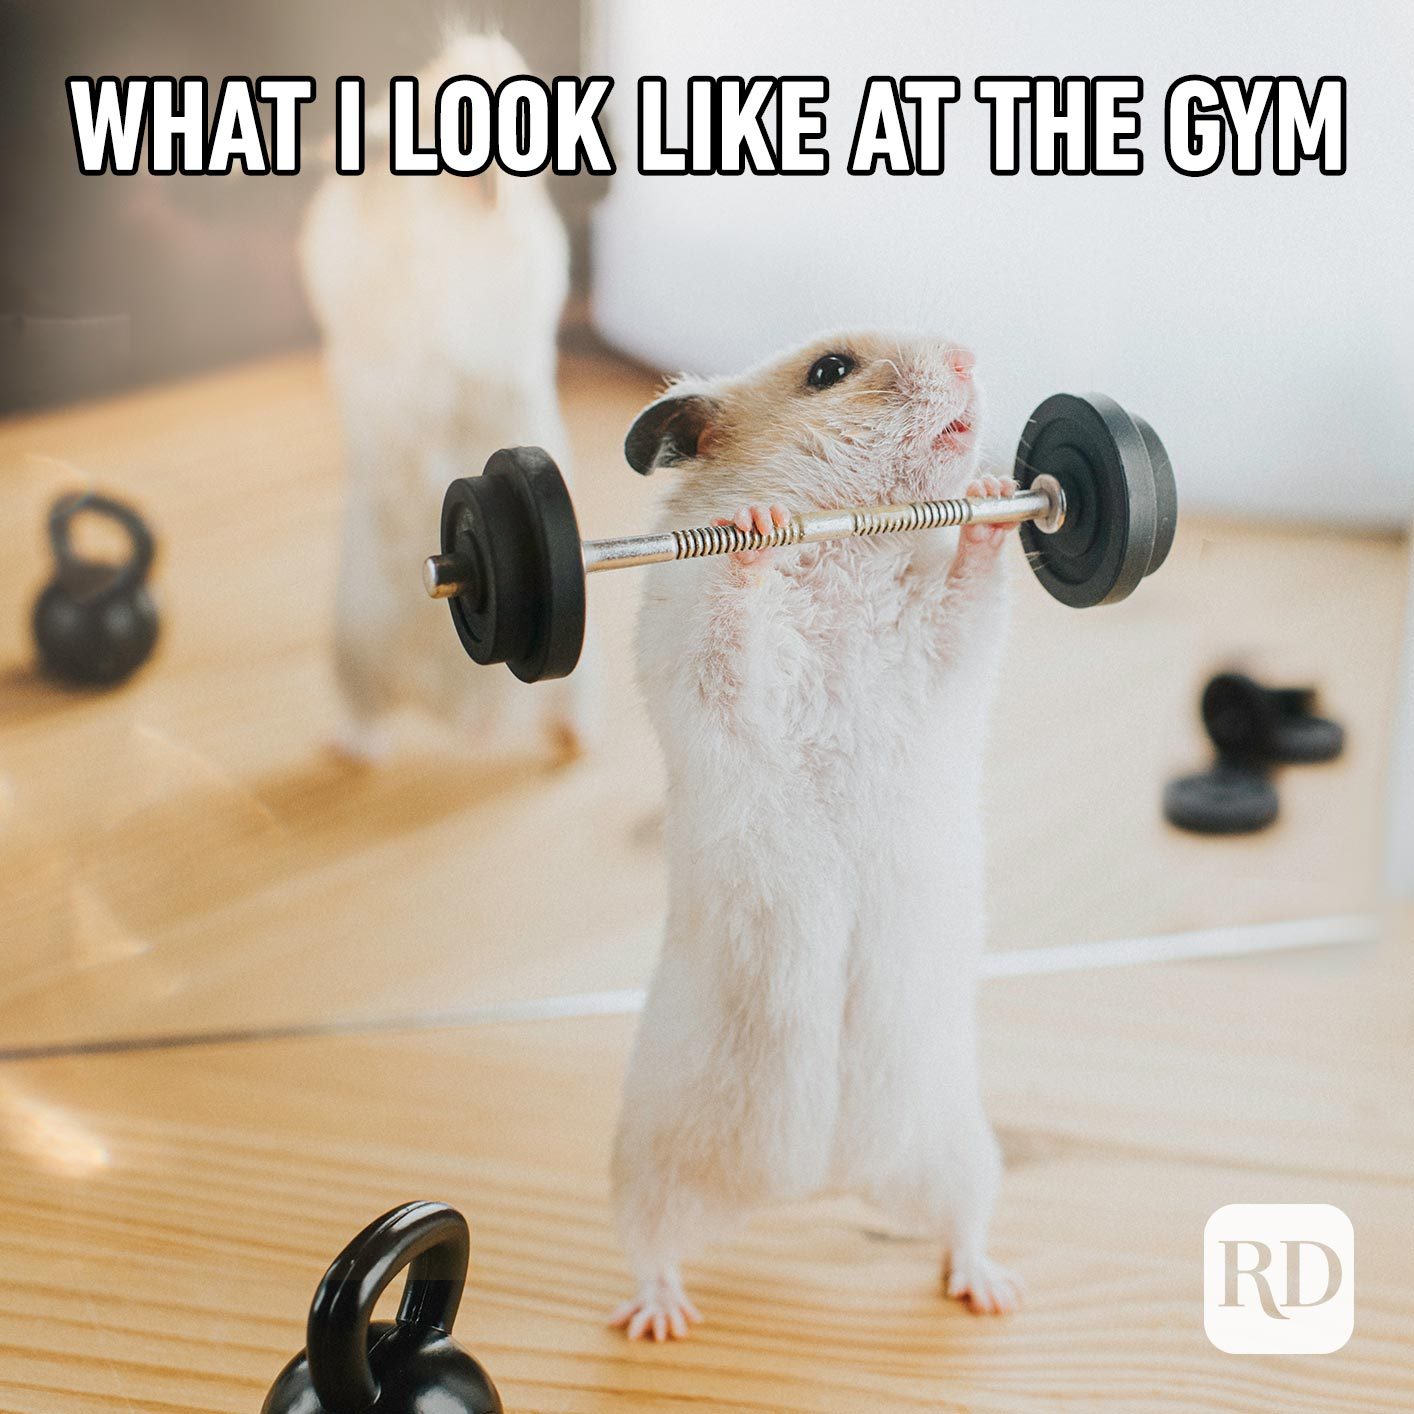 Mouse lifting weight. Meme text: What I look like at the gym